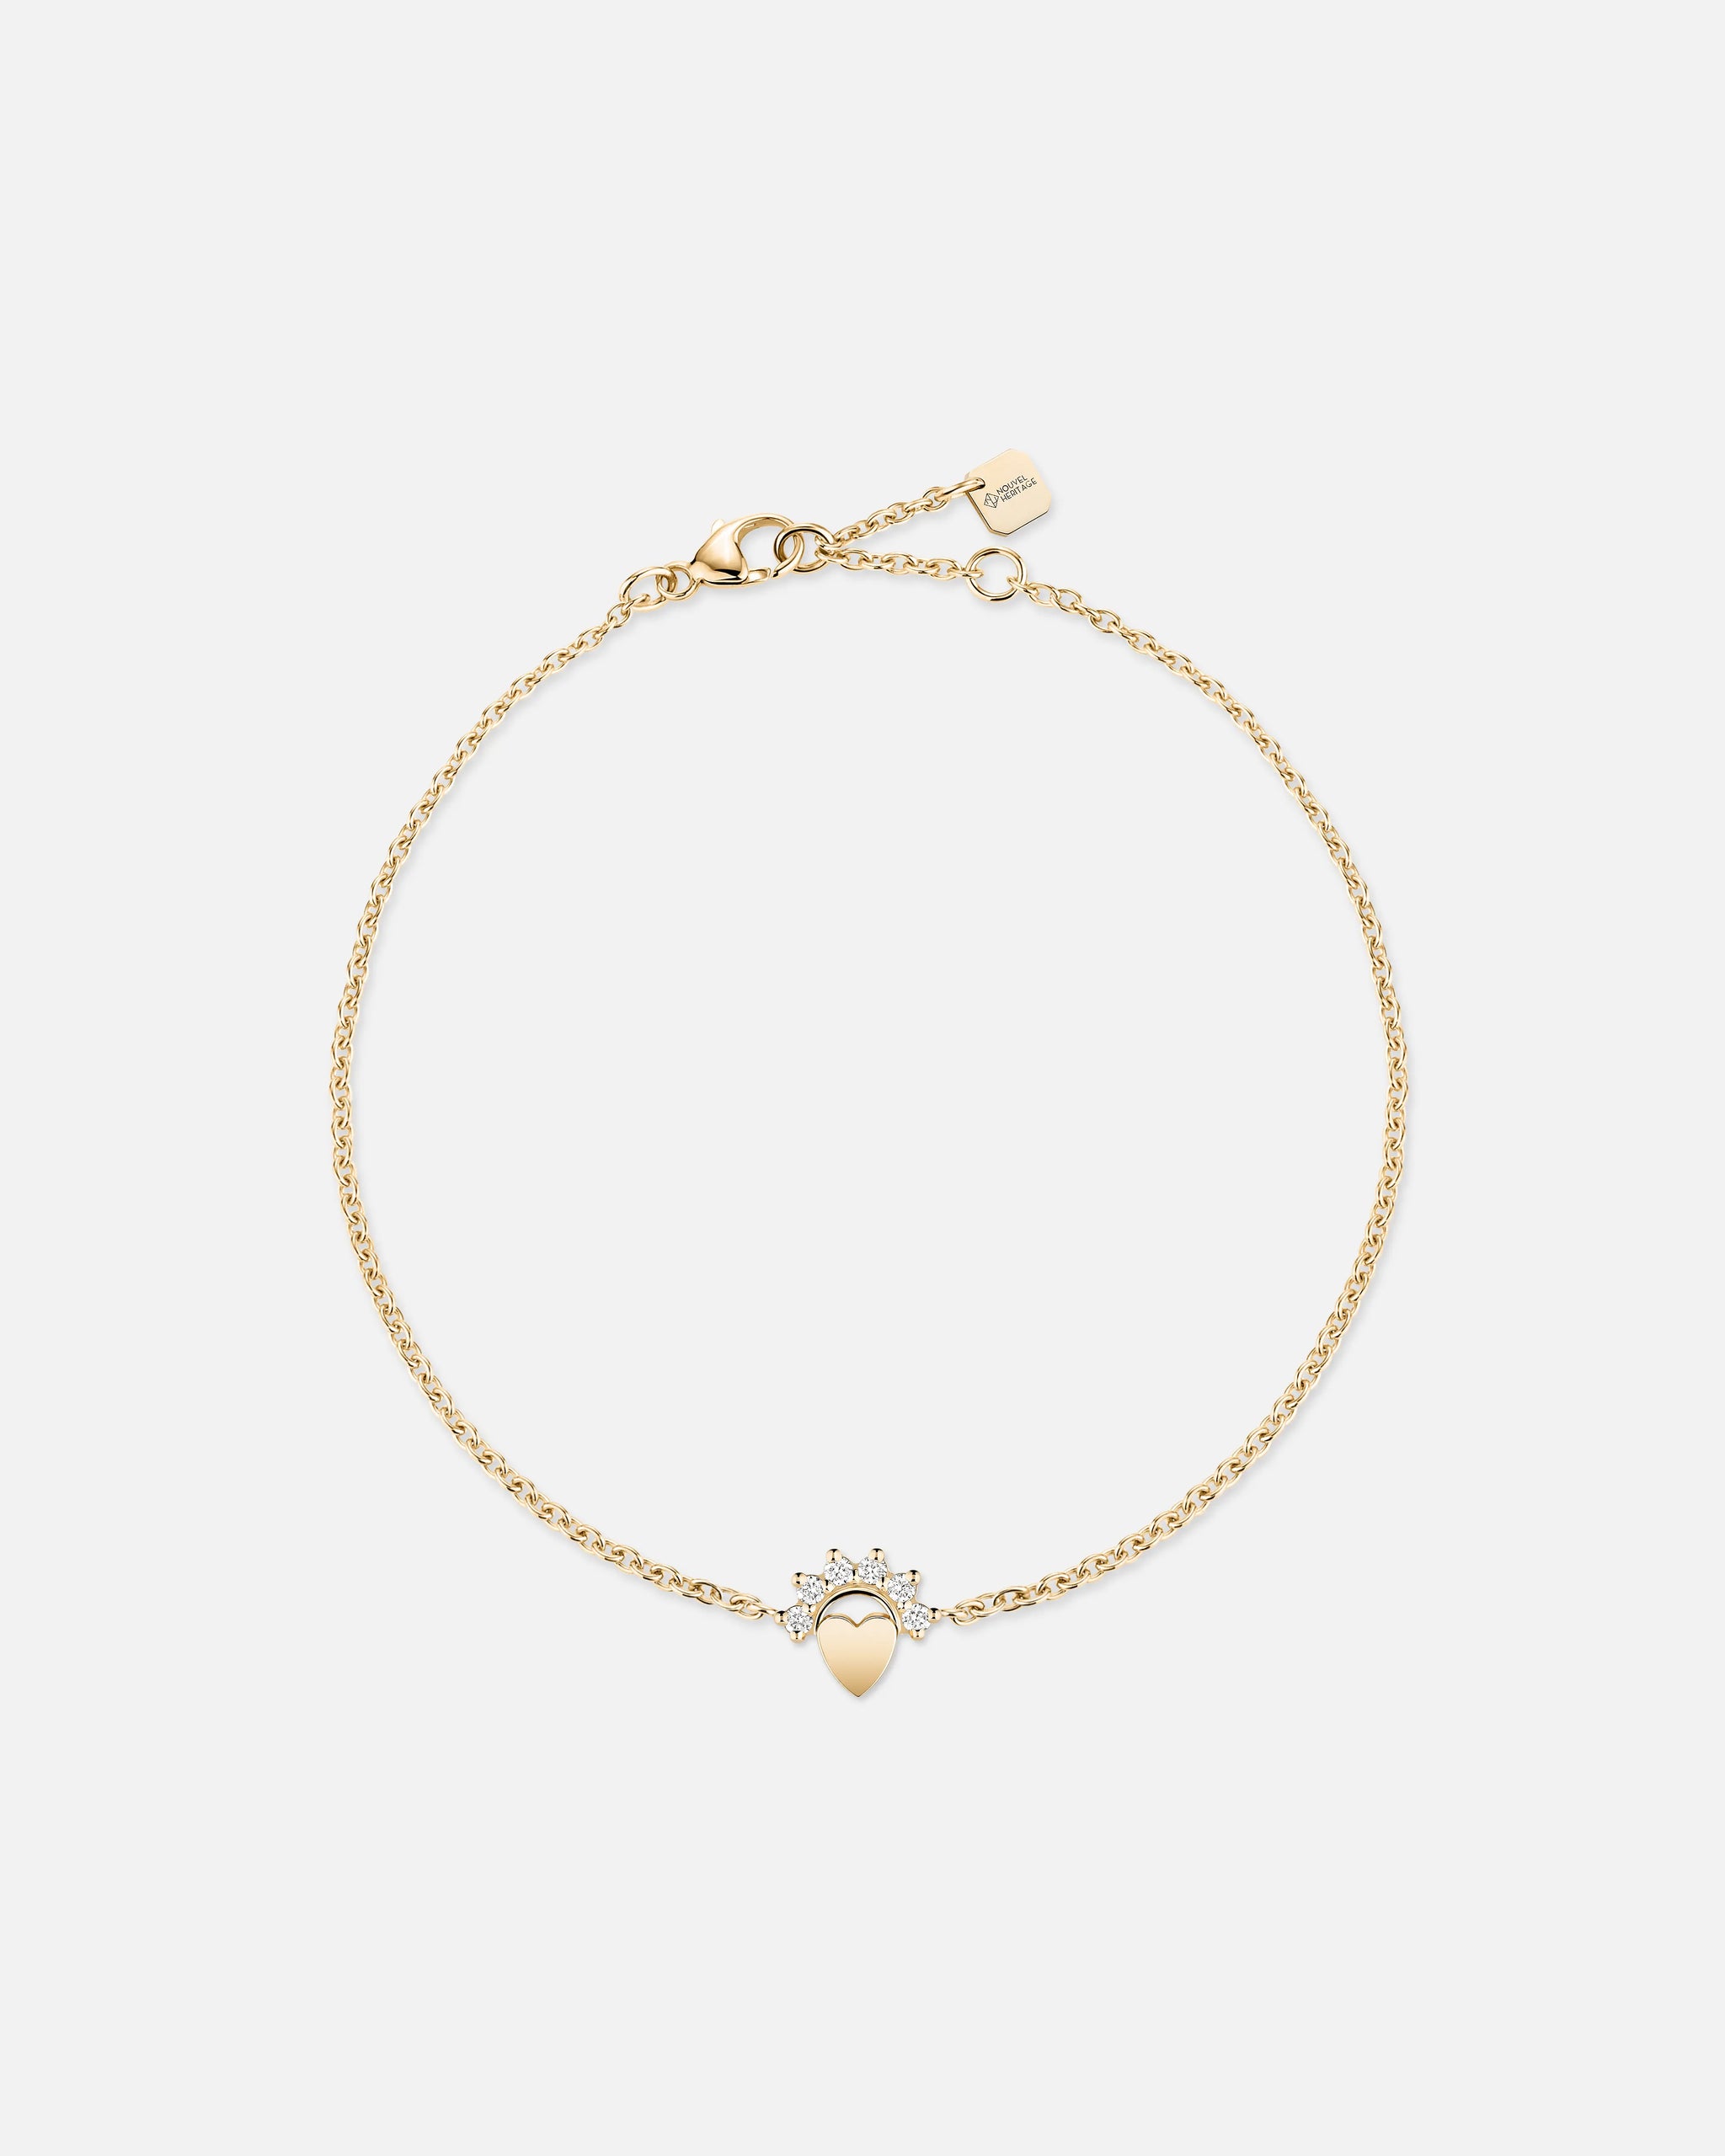 Small Love Bracelet in Yellow Gold - 1 - Nouvel Heritage